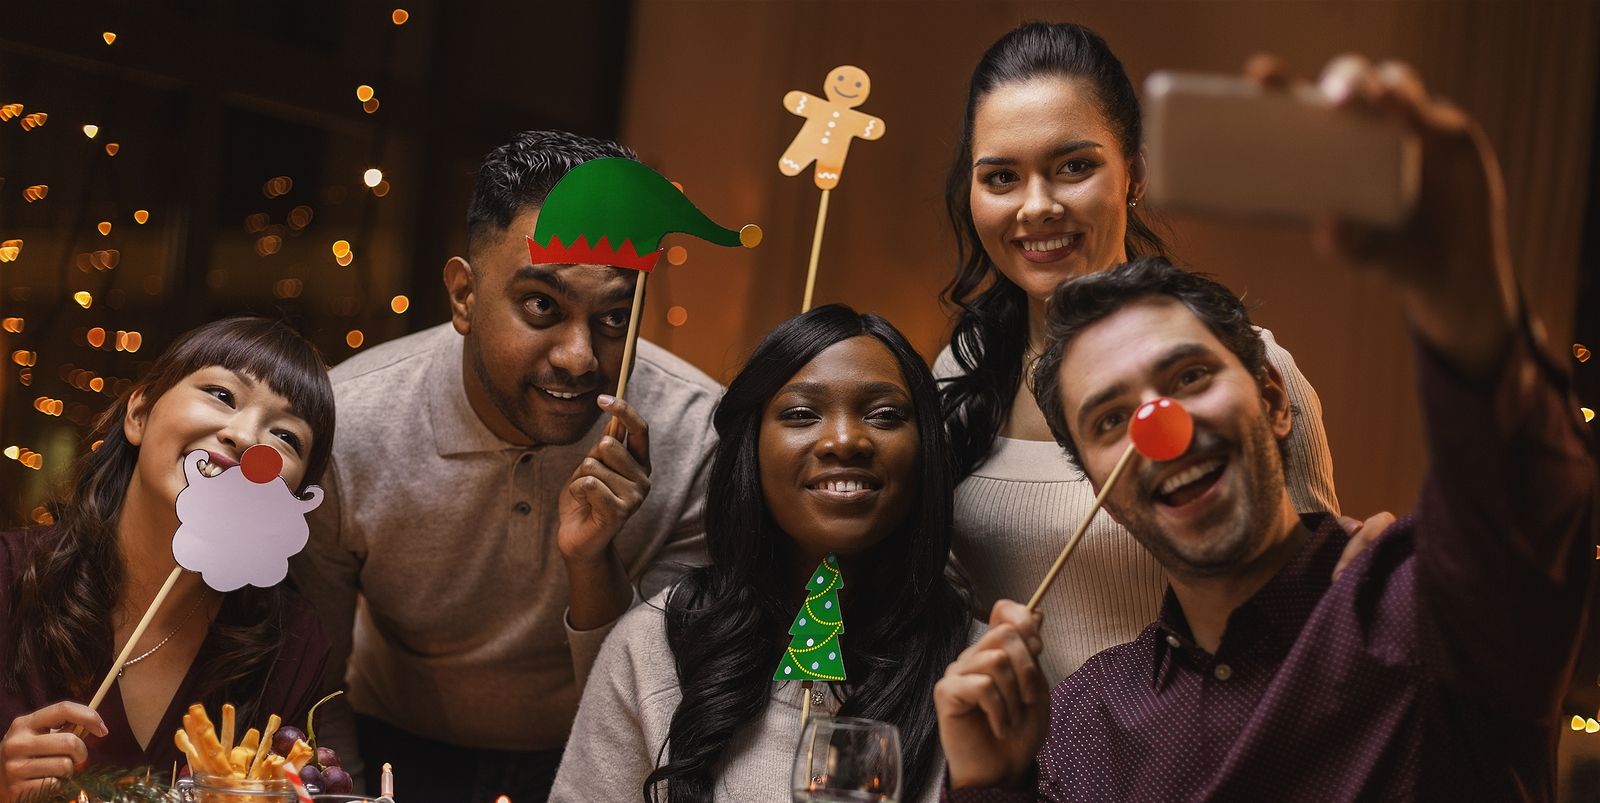 5 friends of different ethnicities sitting at a diner table posing for a selfie with holiday ornaments and smiling.